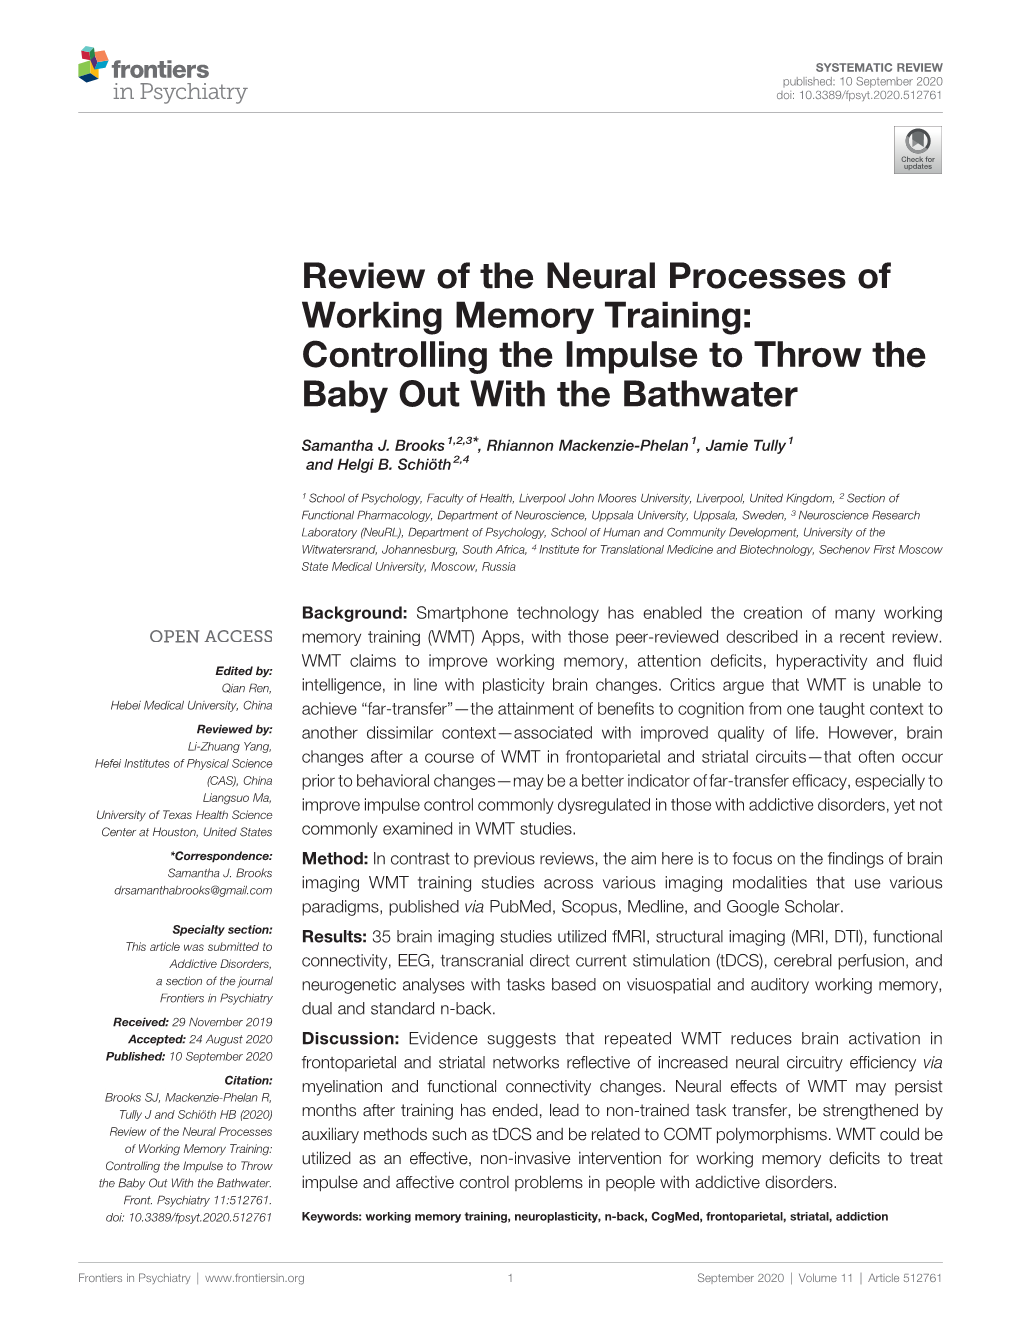 Review of the Neural Processes of Working Memory Training: Controlling the Impulse to Throw the Baby out with the Bathwater